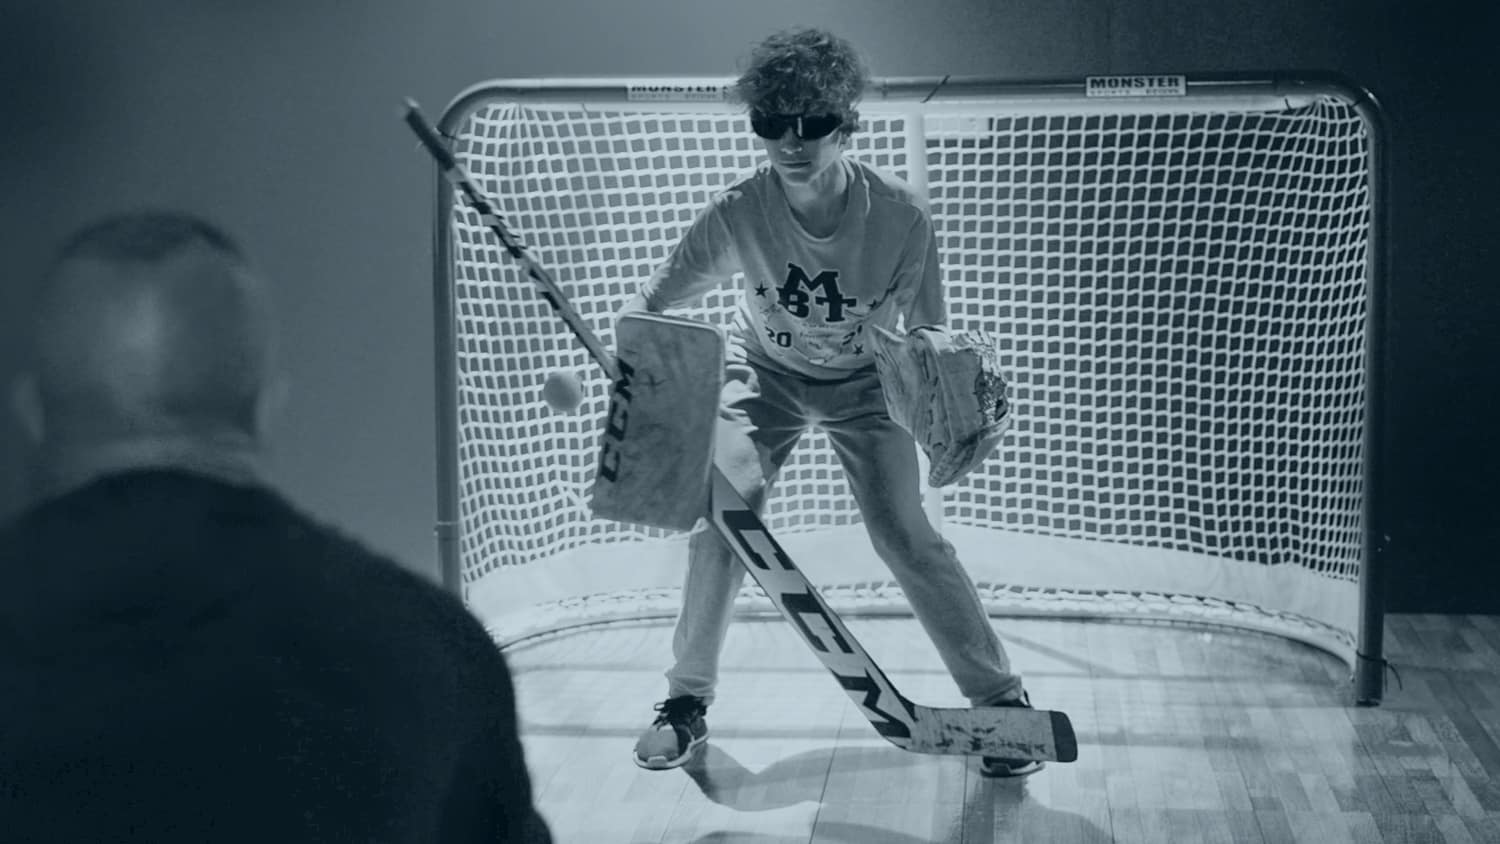 A young hockey player uses Senaptec glasses in a hockey net.